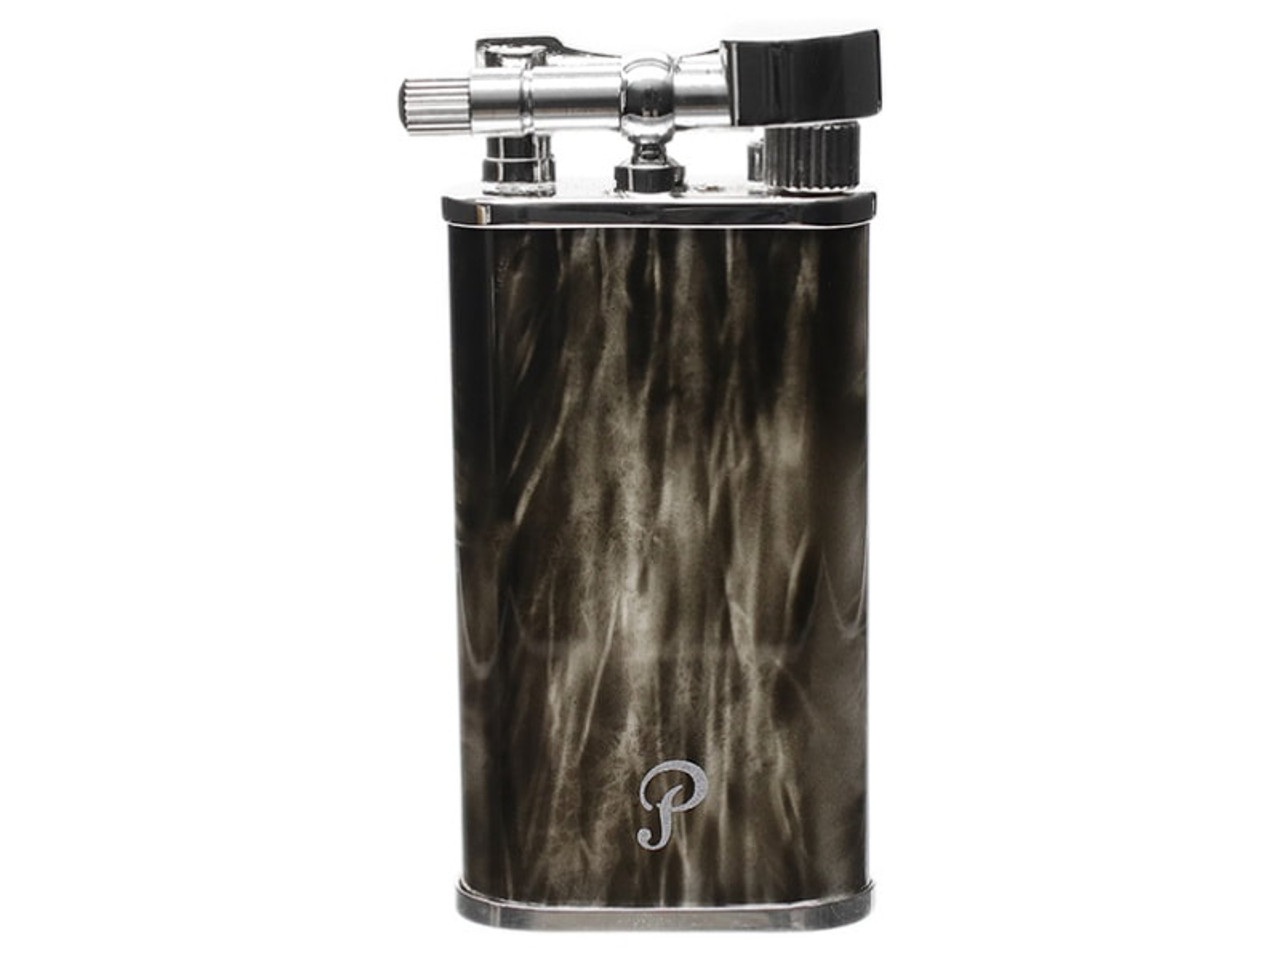 Peterson Gray Pipe Lighter Available at Pipe